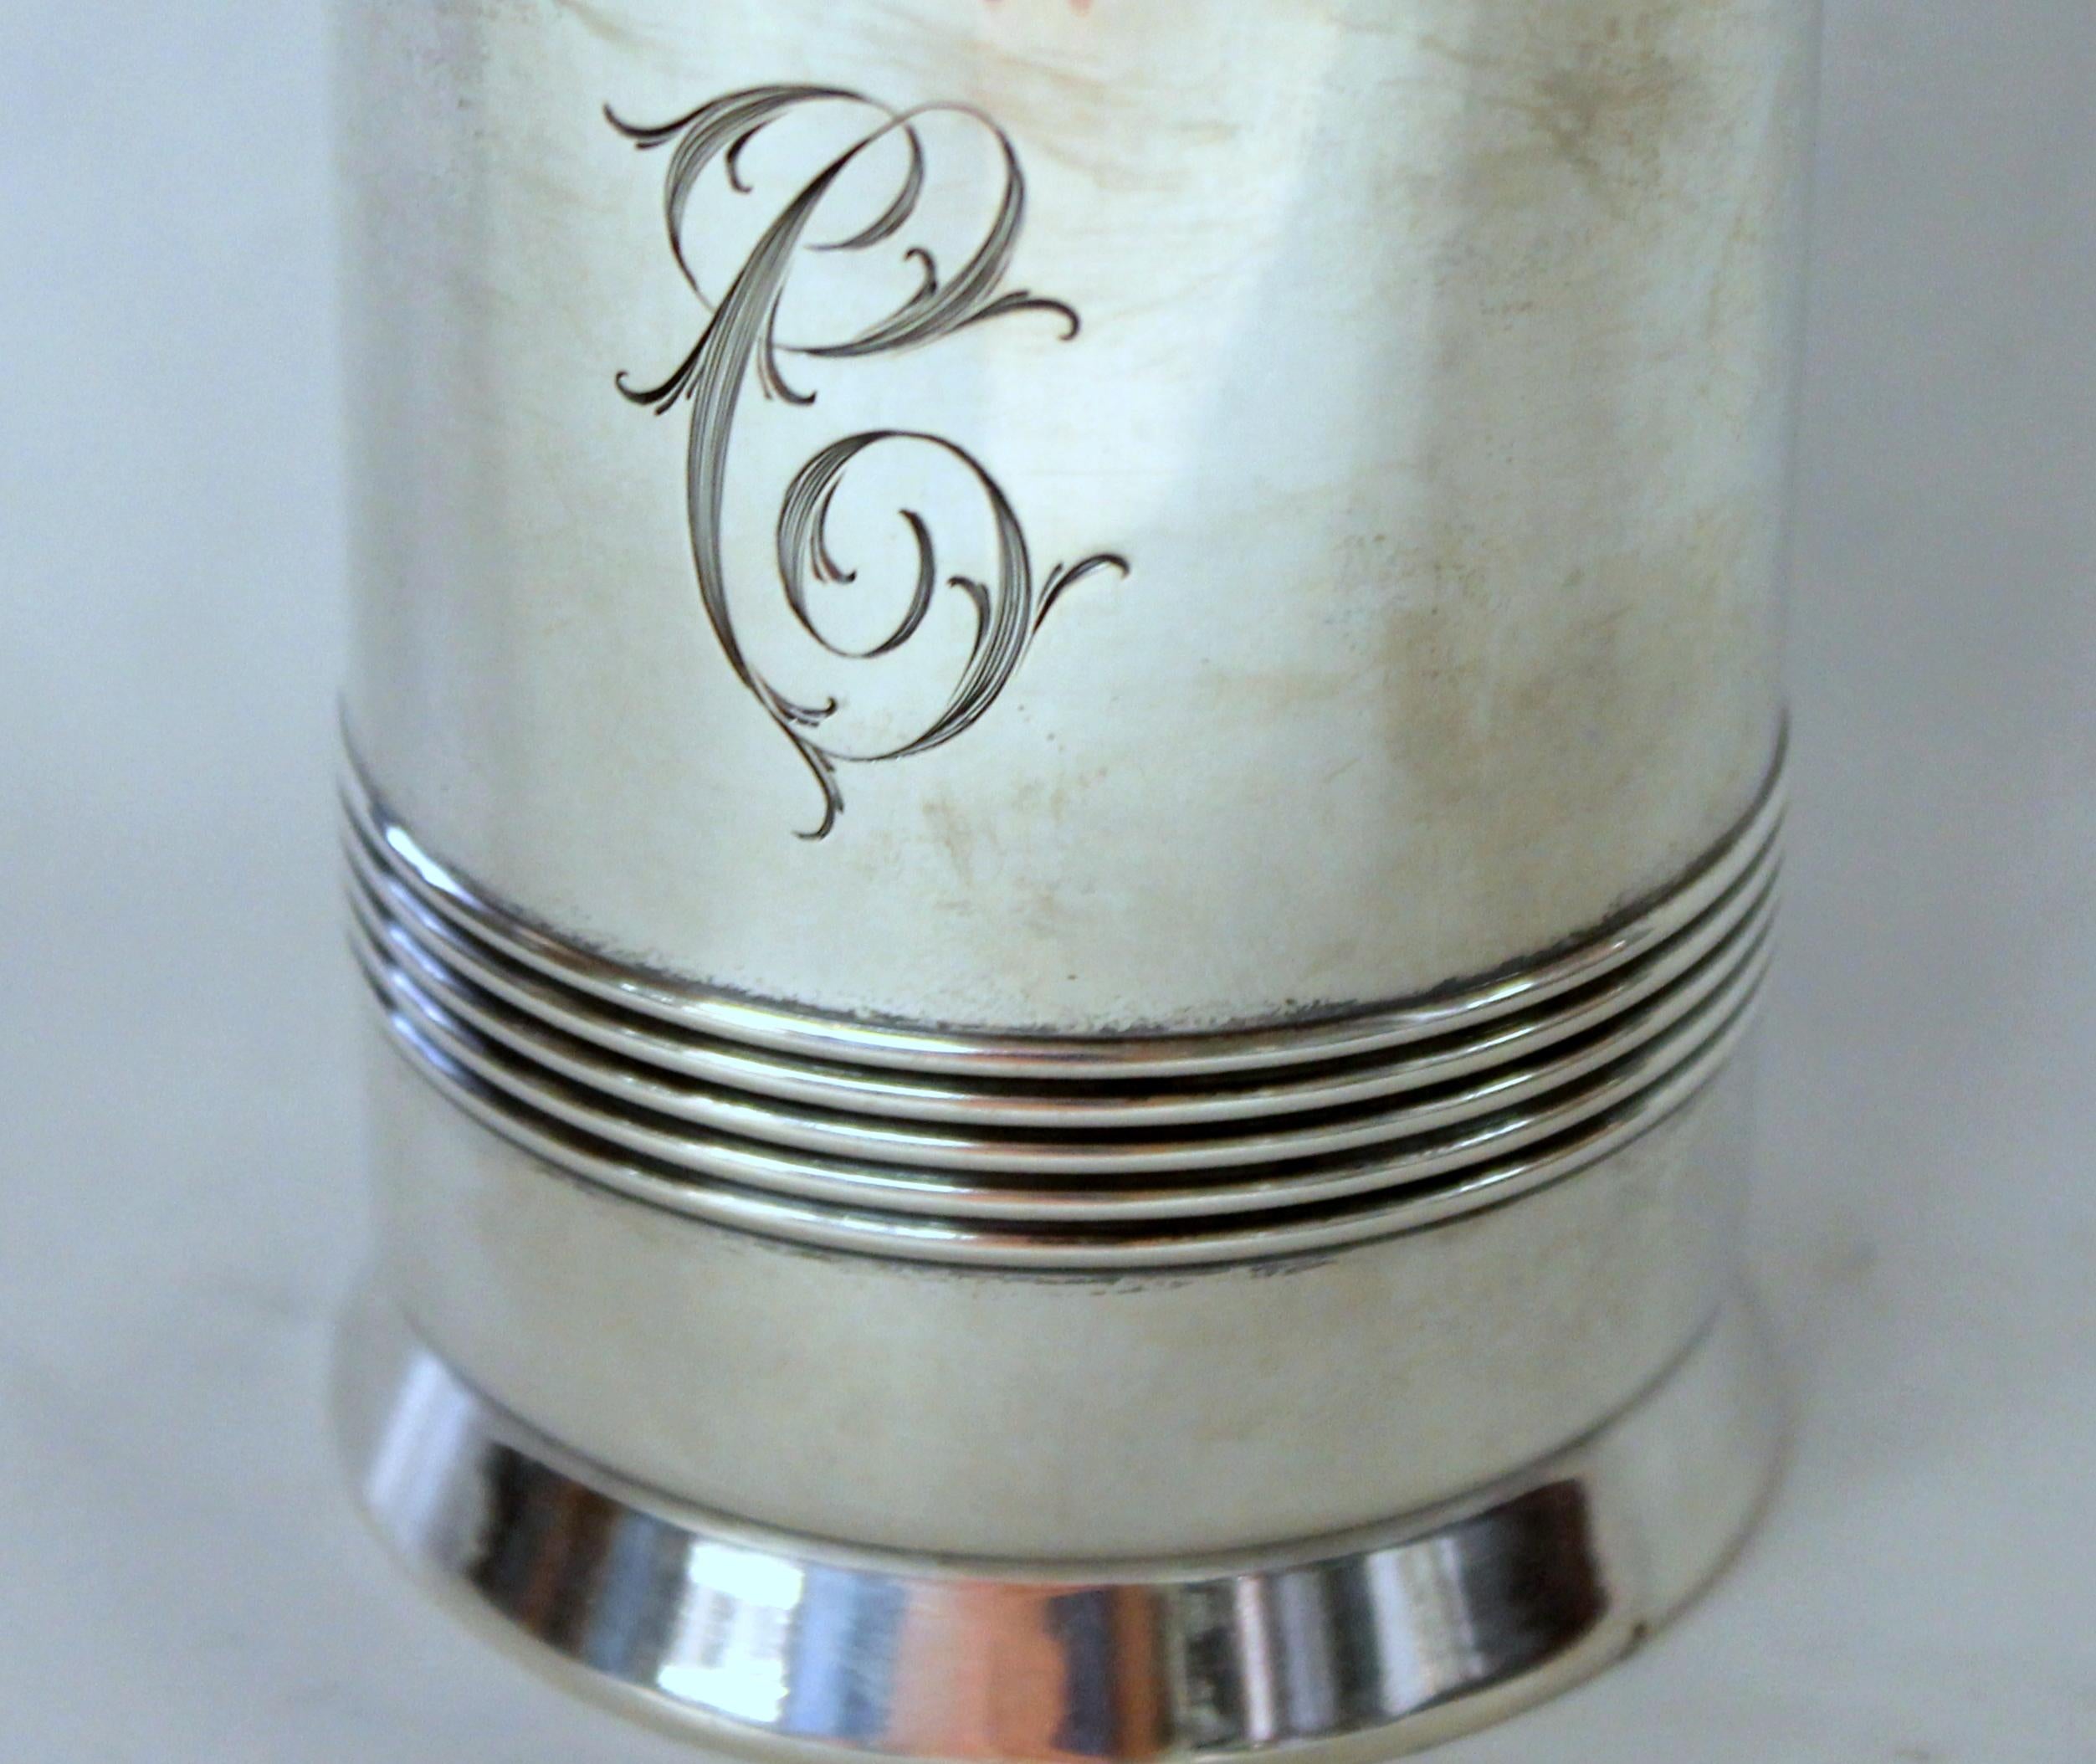 Superb Old Gorham sterling silver cylindrical or bullet-shaped sugar dredger, muffineer or shaker.

Made by Gorham Manufacturing Company for S. Kind & Son (Philadelphia). 

Approx. 7 troy ounces. Fabulous hand engraved monogrammed 